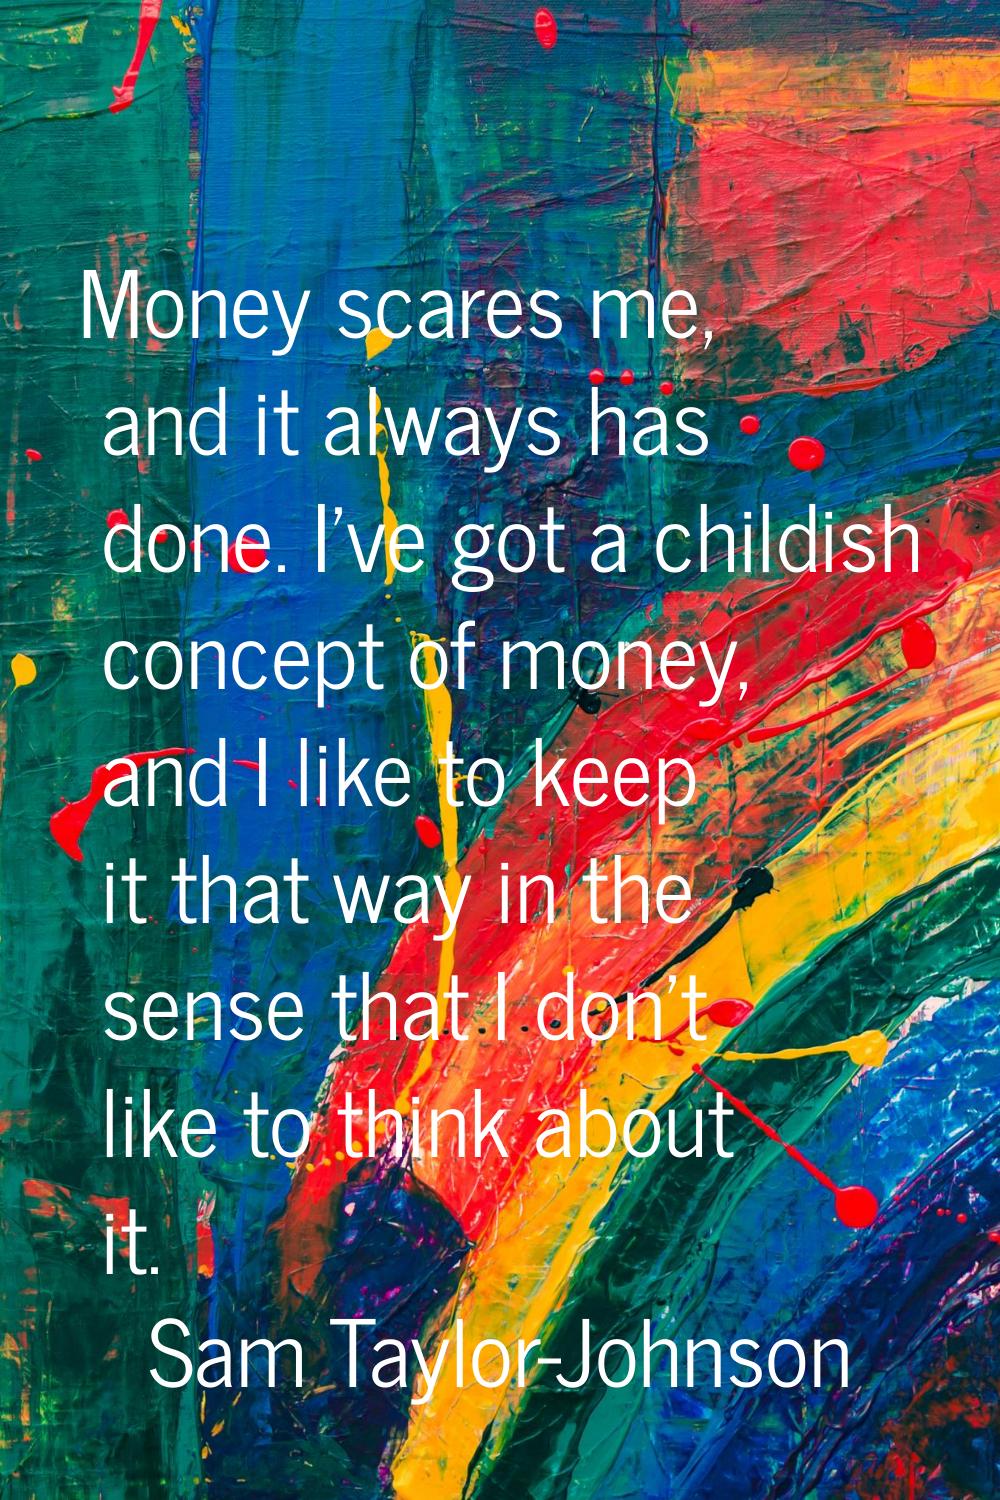 Money scares me, and it always has done. I've got a childish concept of money, and I like to keep i